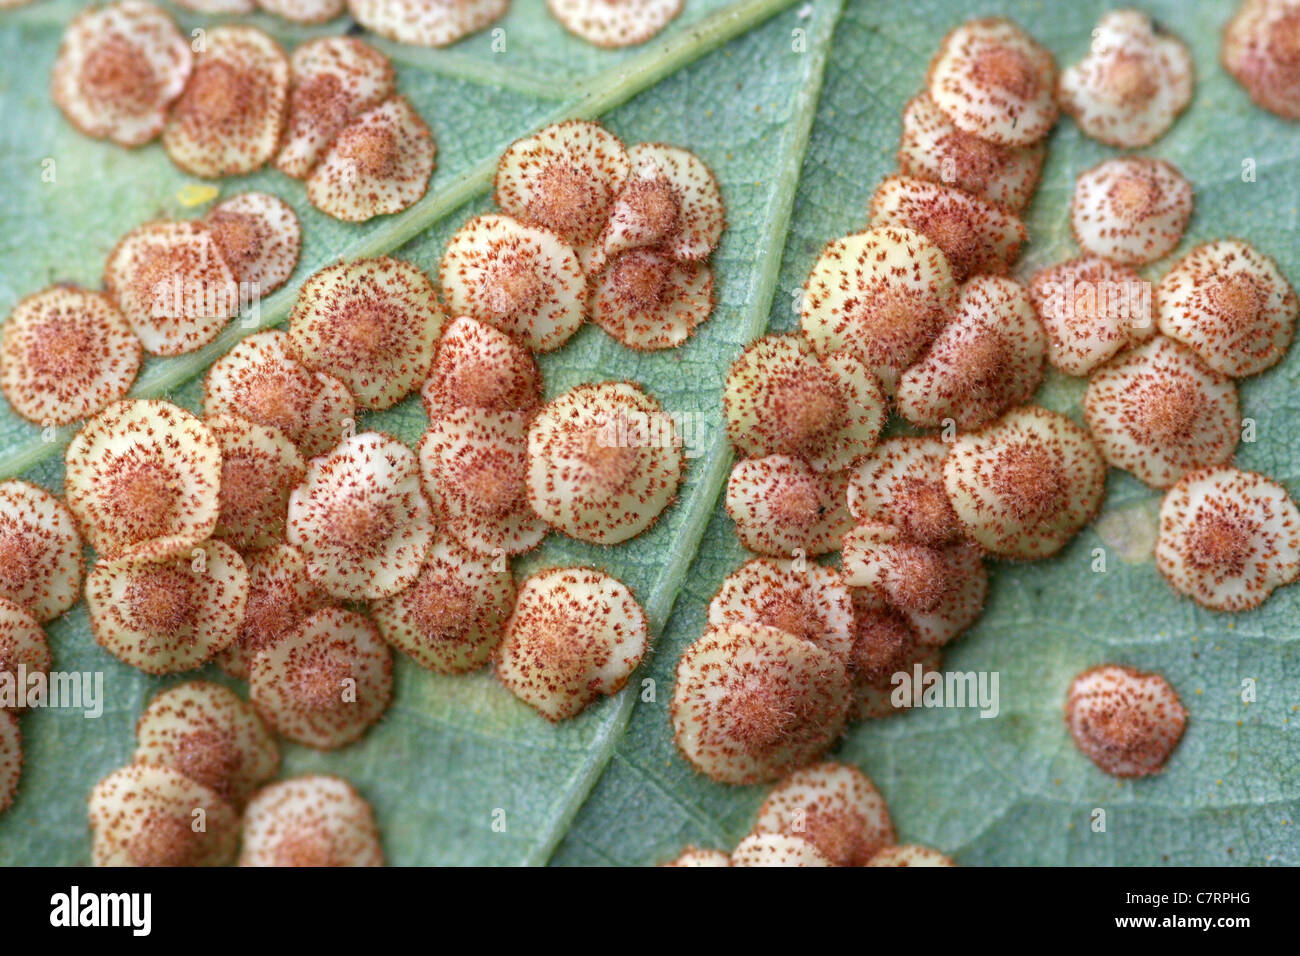 Oak Leaf Covered In Common Spangle Galls Caused By The Gall Wasp Neuroterus quercusbaccarum Stock Photo